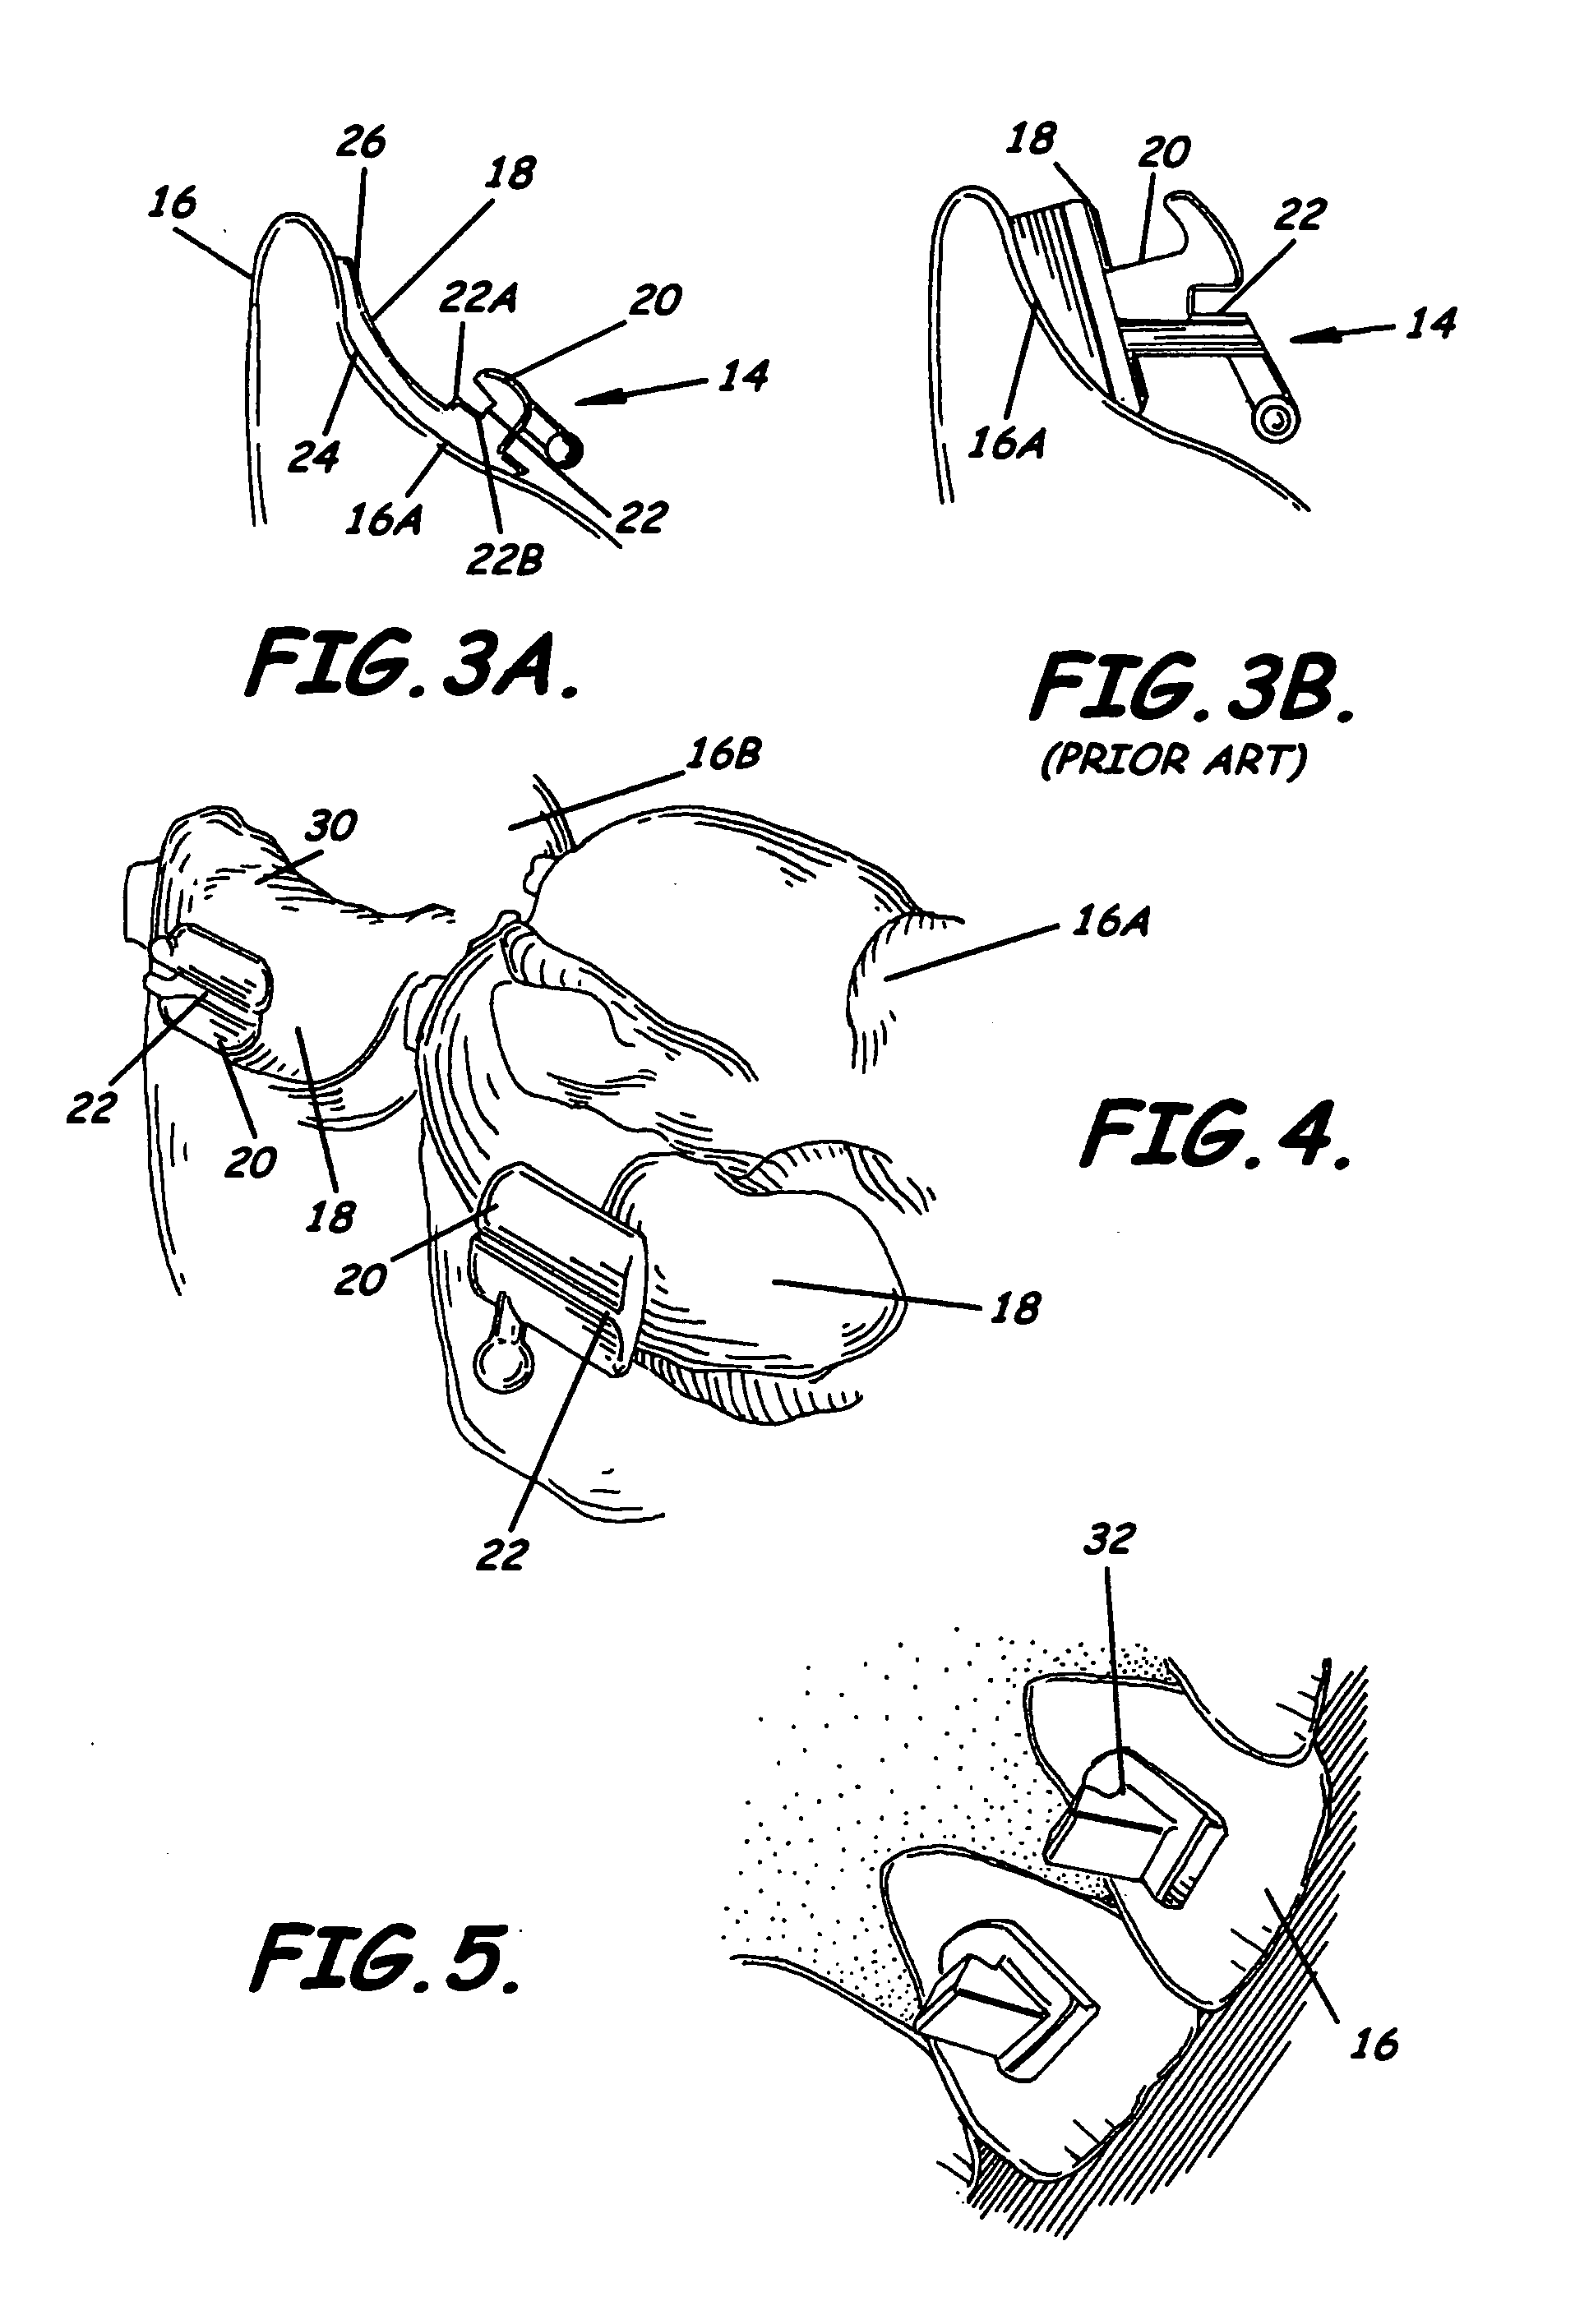 Modular system for customized orthodontic appliances